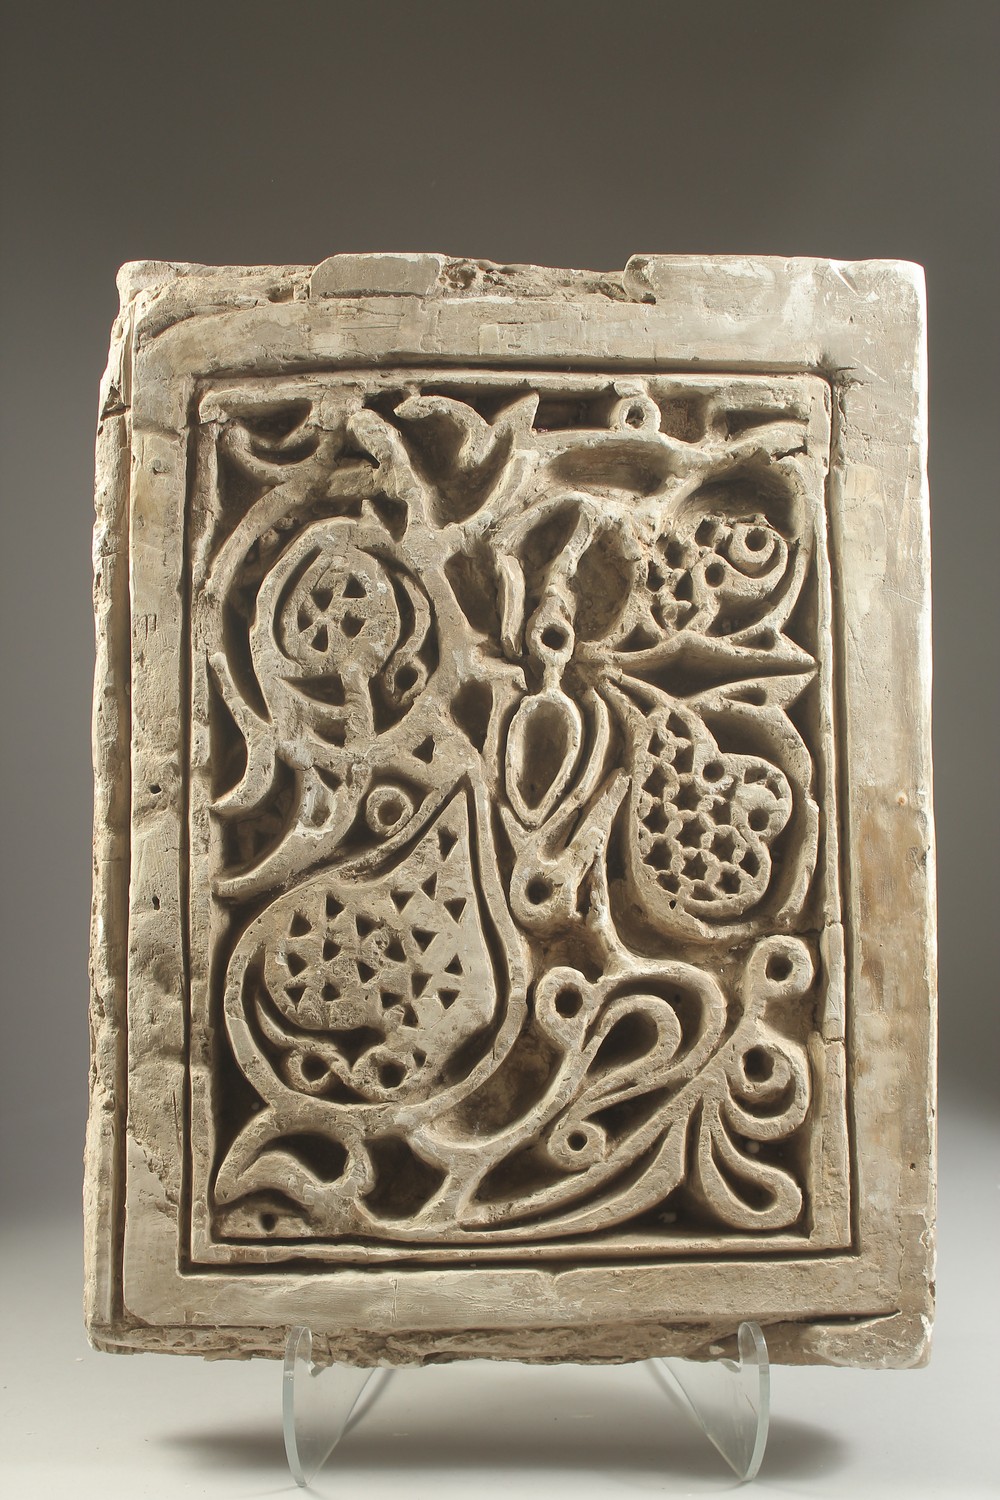 A FINE AND LARGE 17TH CENTURY MUGHAL INDIAN CARVED STONE ARCHITECTURAL PANEL, with foliate motif